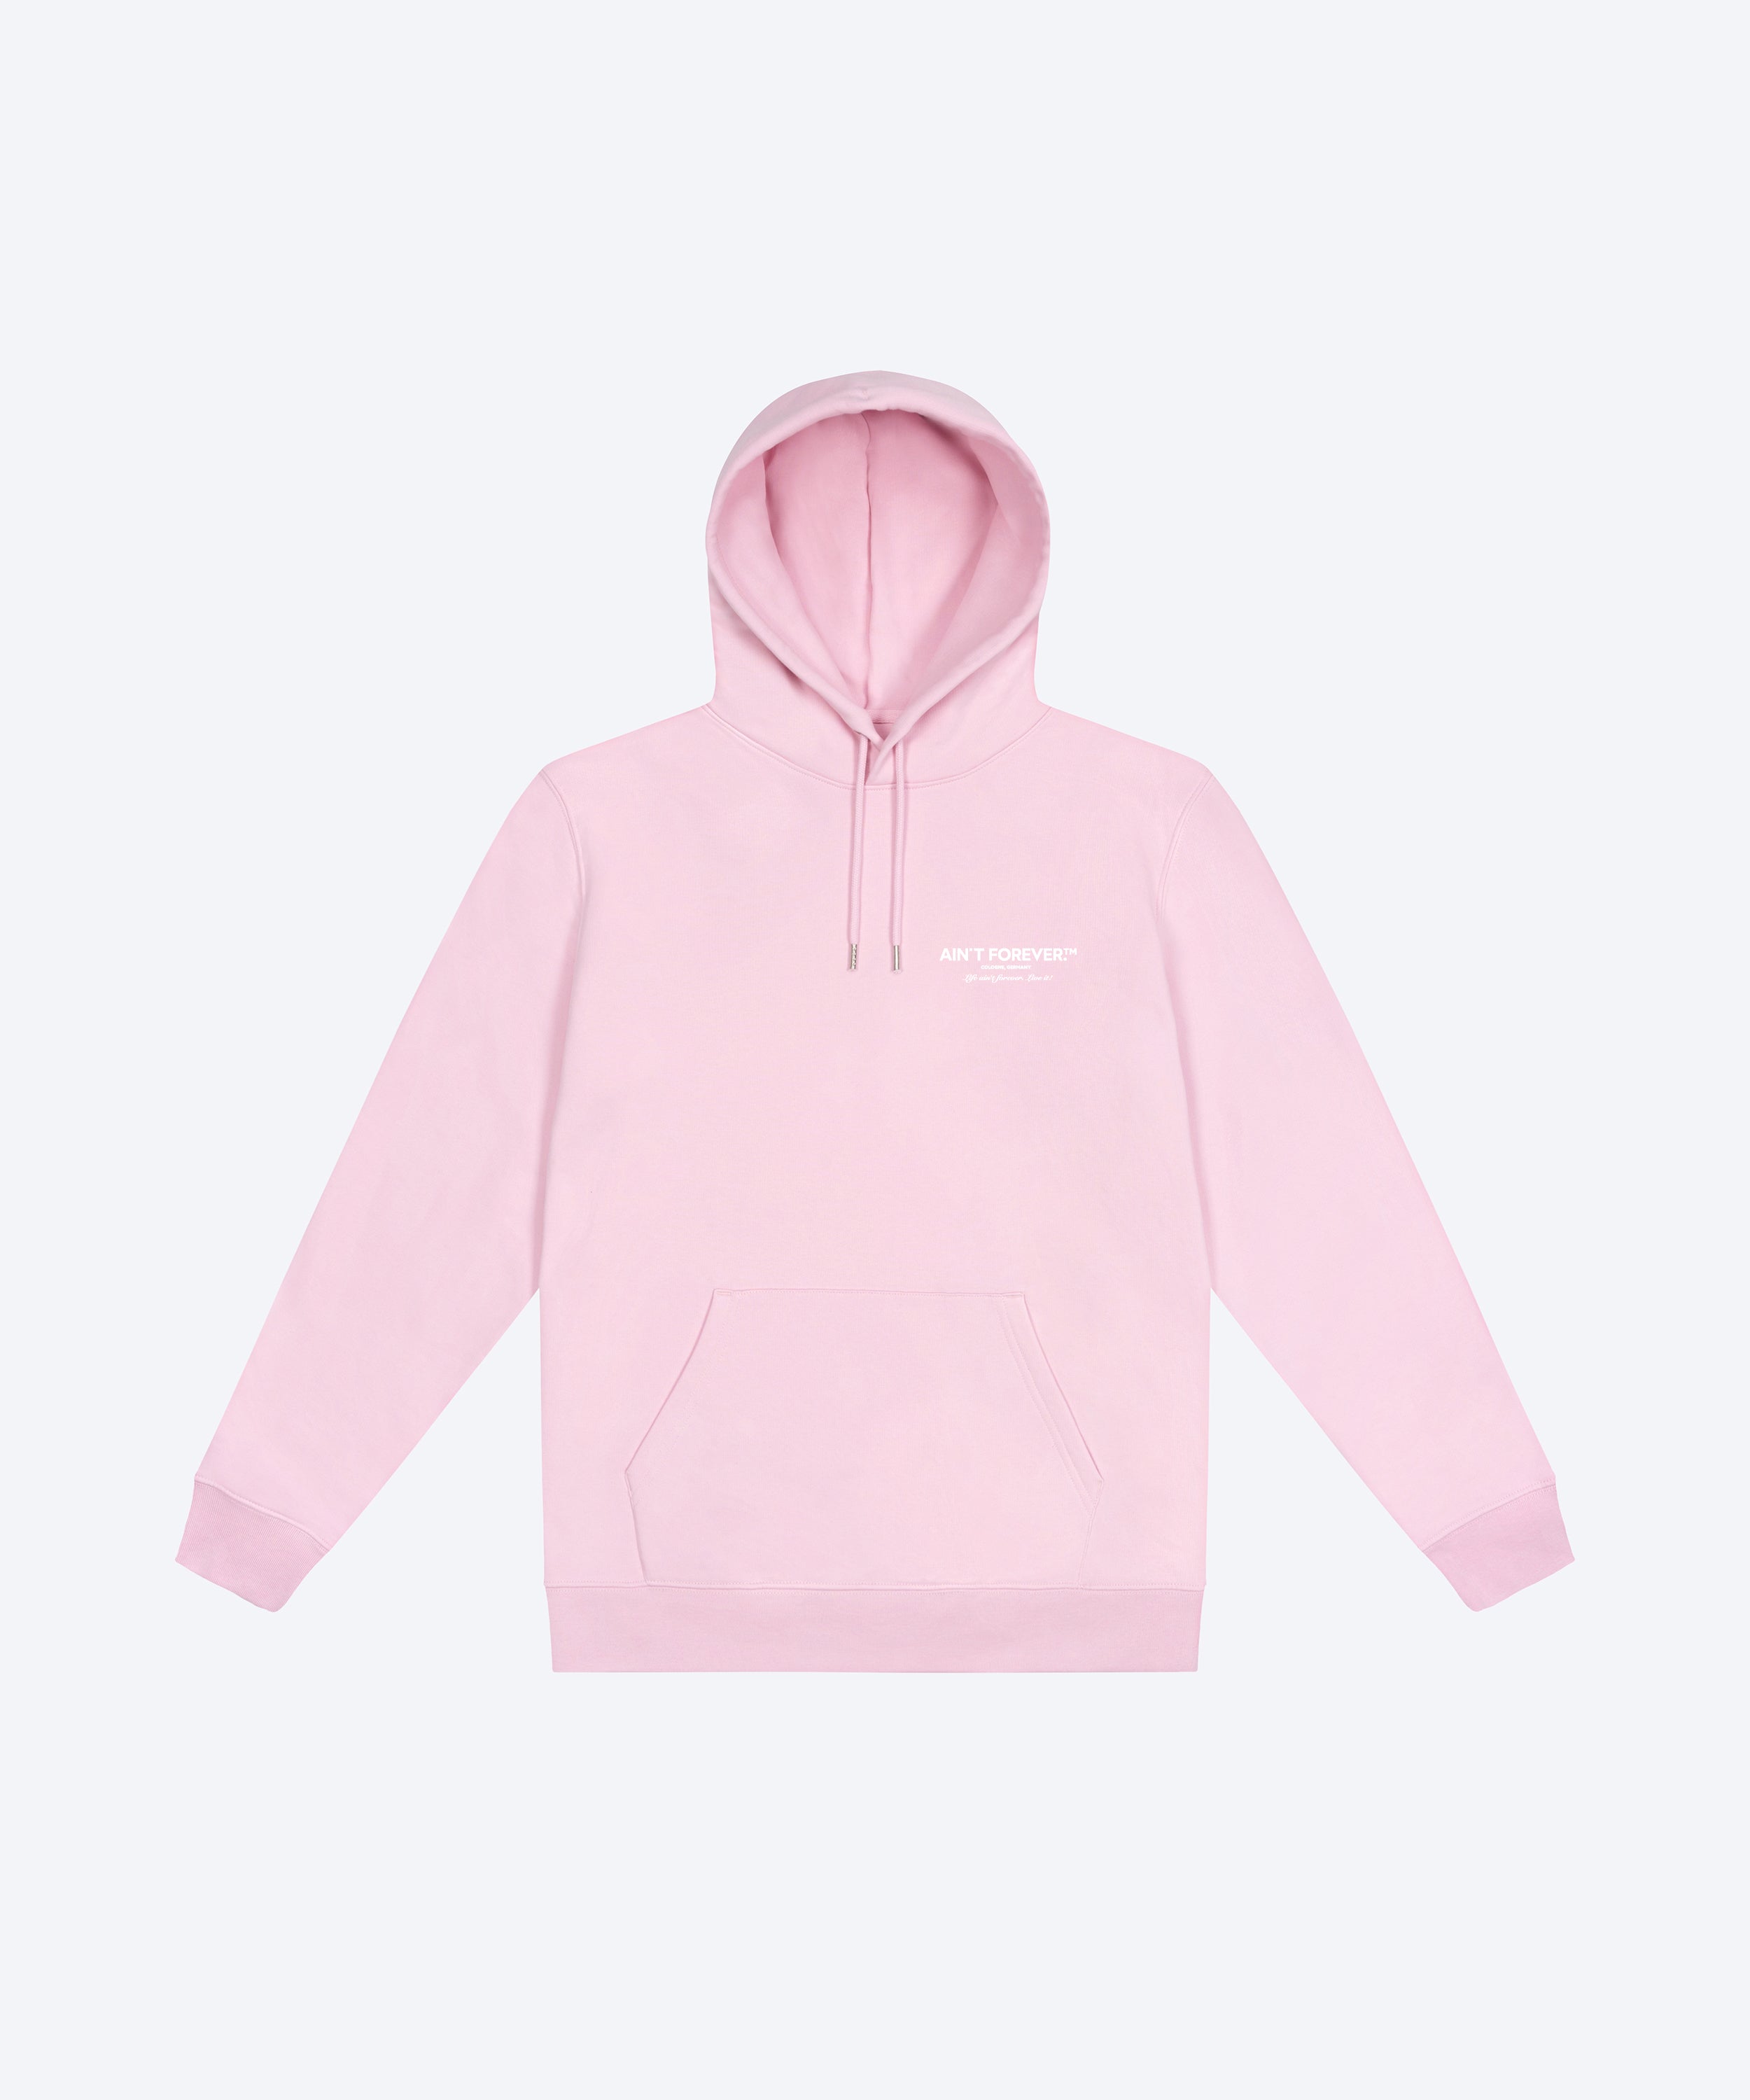 THE LIVE IT! HOODIE (PINK / WHITE)